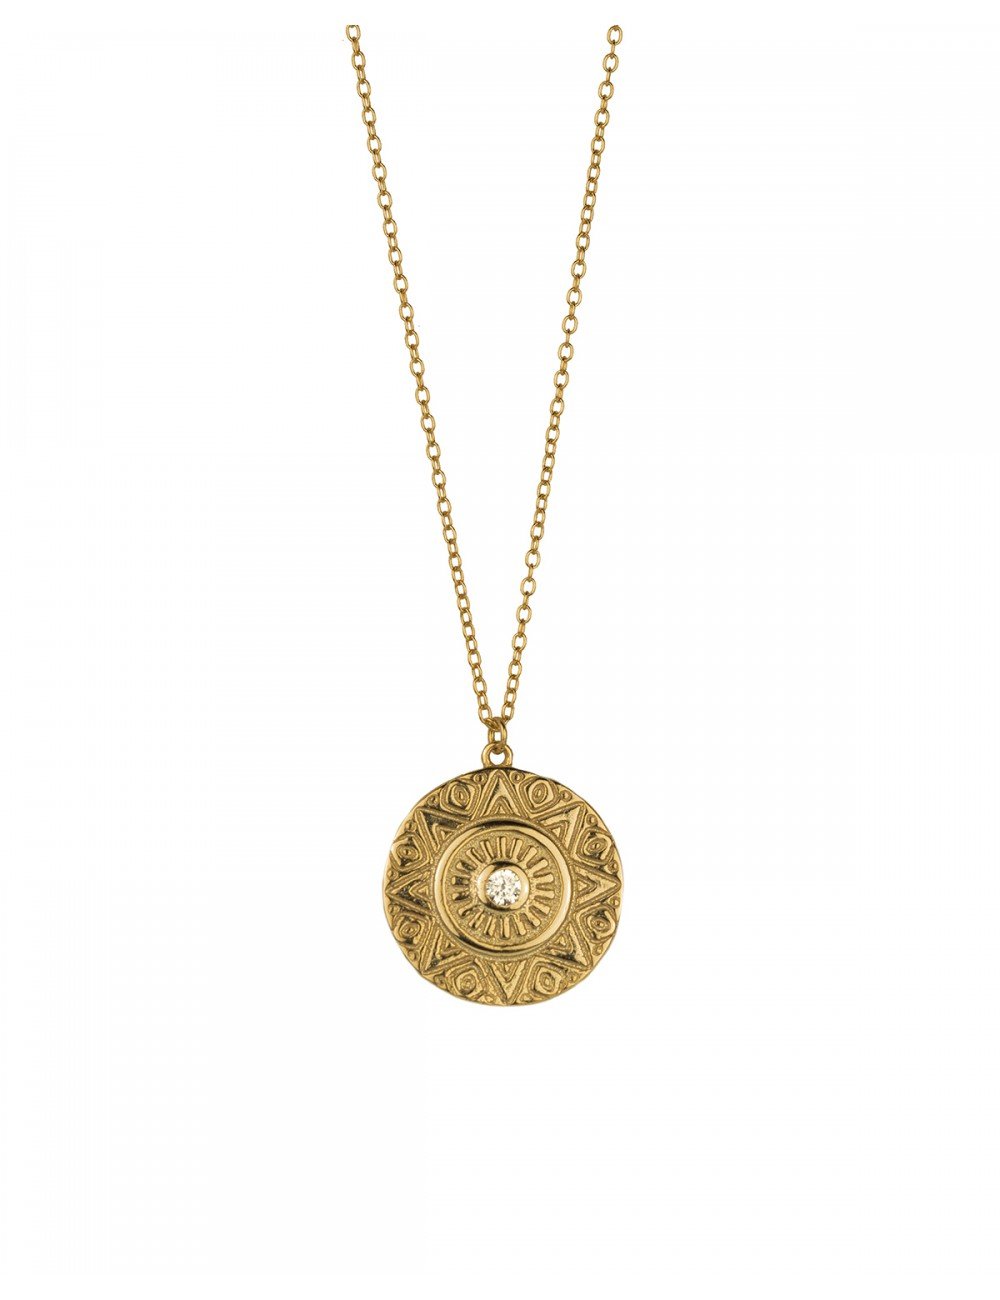 Bergere gold - Gold necklaces - Trium Jewelry